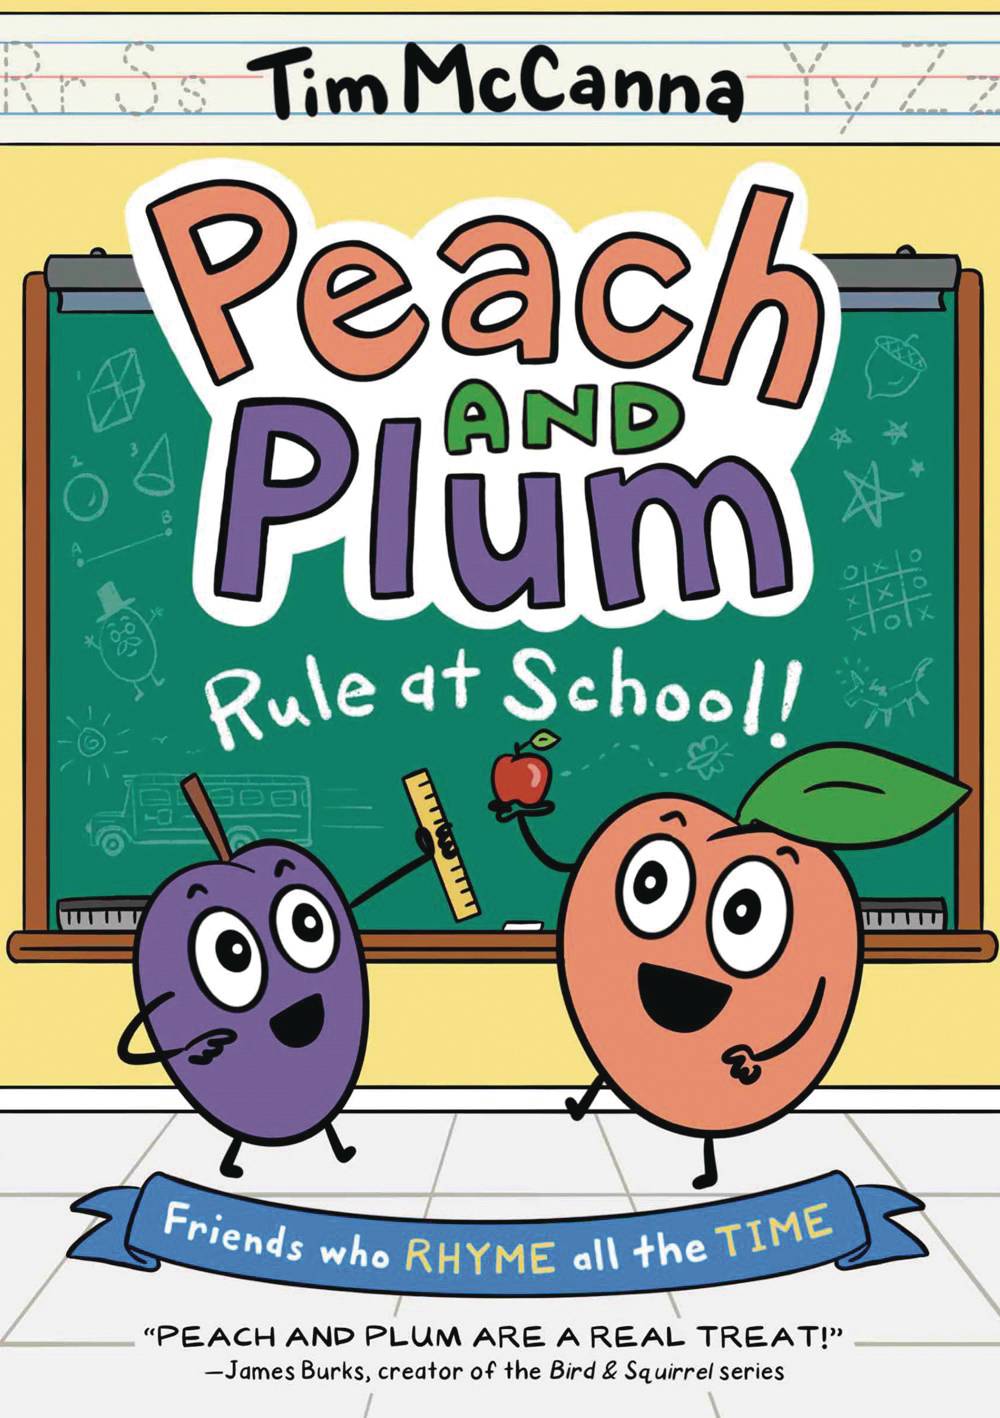 PEACH AND PLUM GN RULE AT SCHOOL